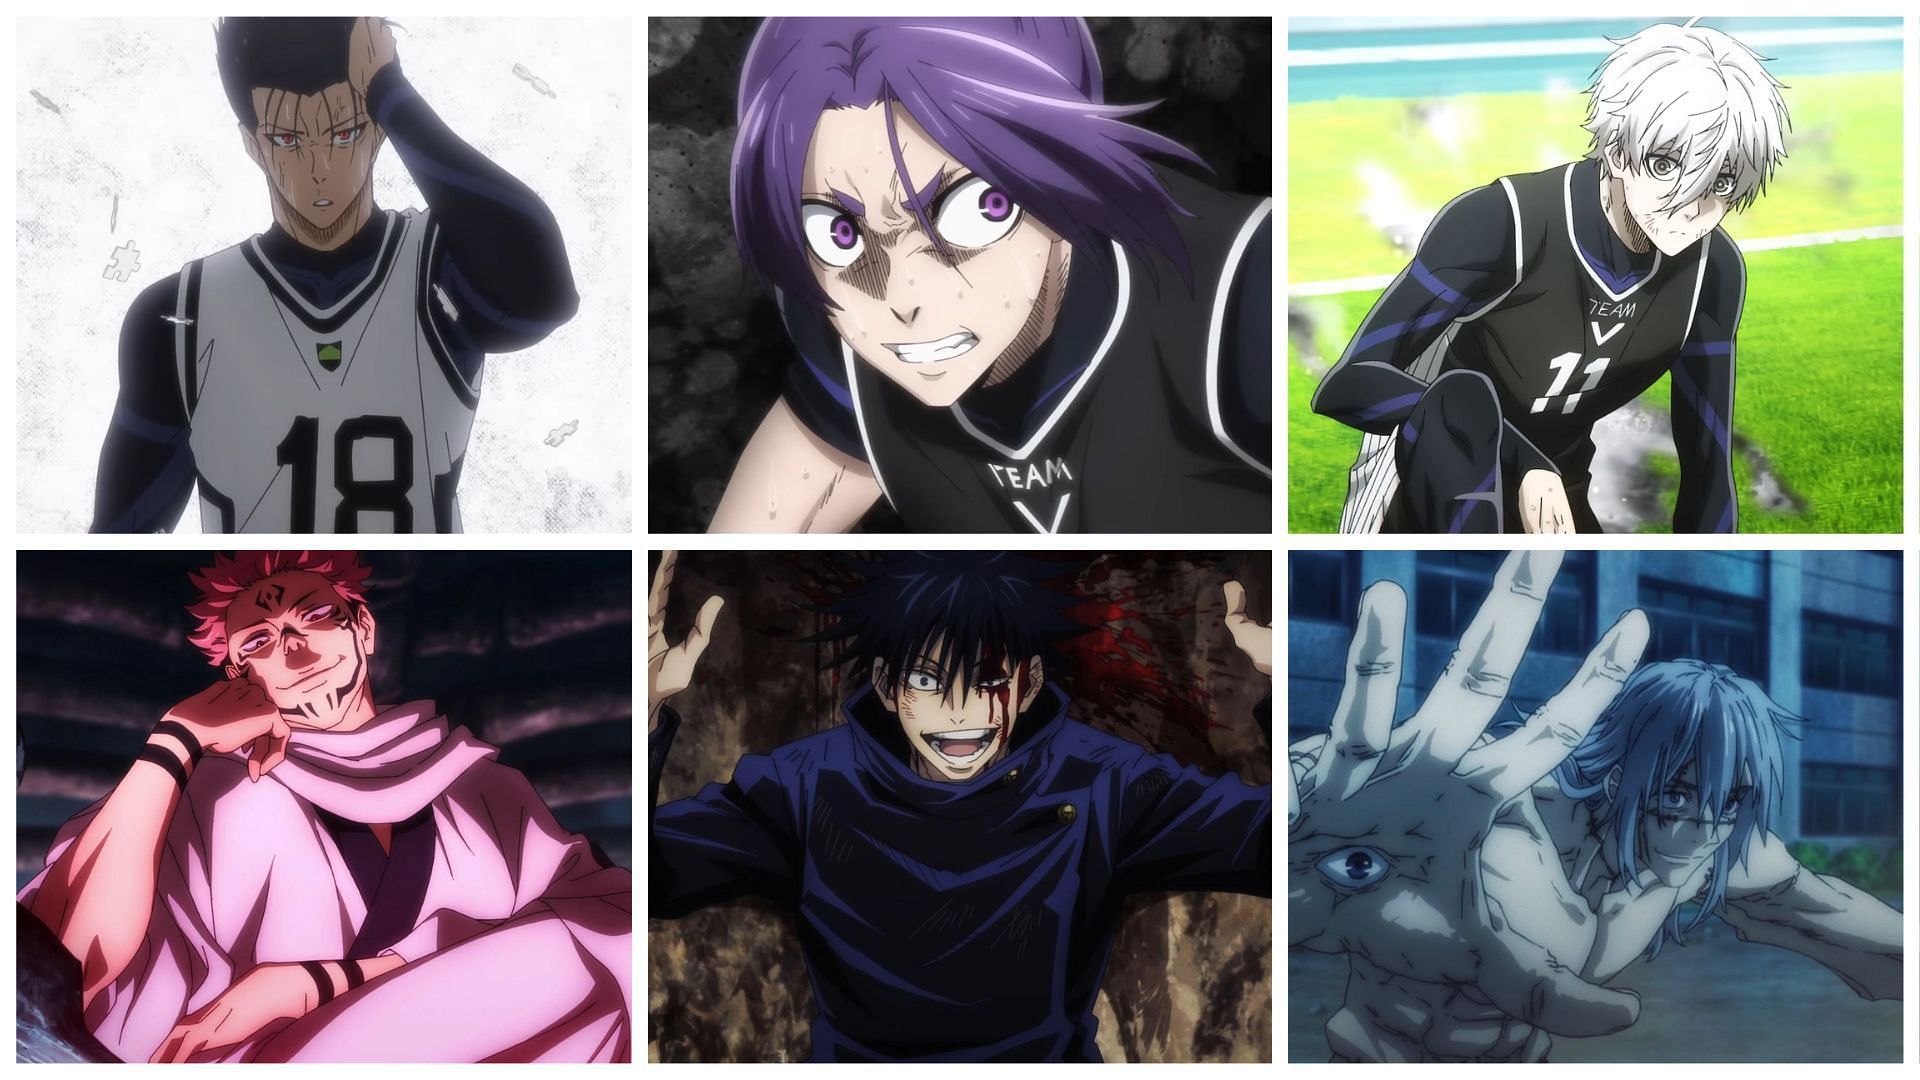 Pairs of Blue Lock and Jujutsu Kaisen characters who have the same voice